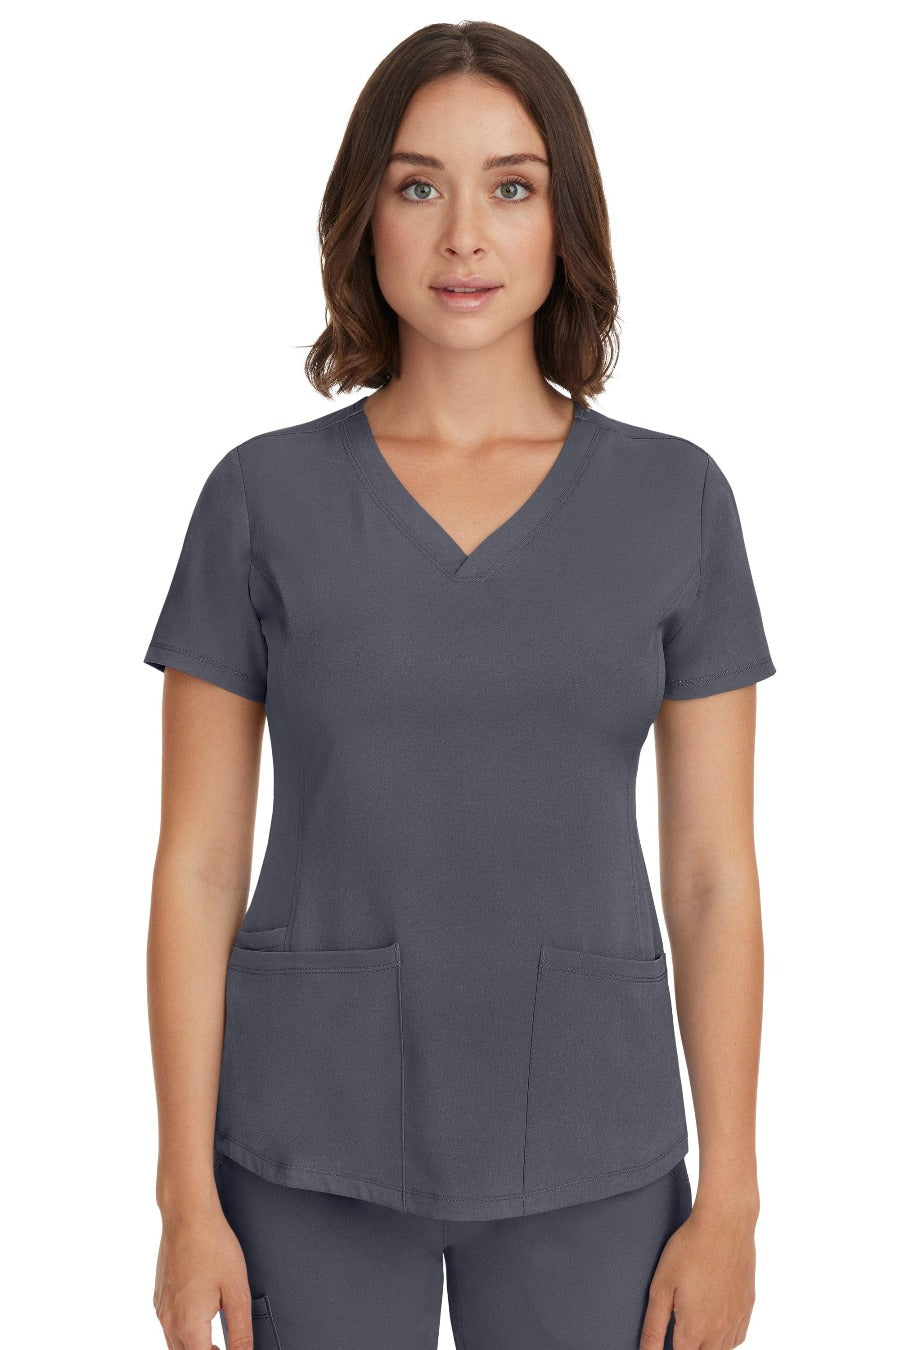 Healing Hands HH Works top in pewter from Coulee Scrubs